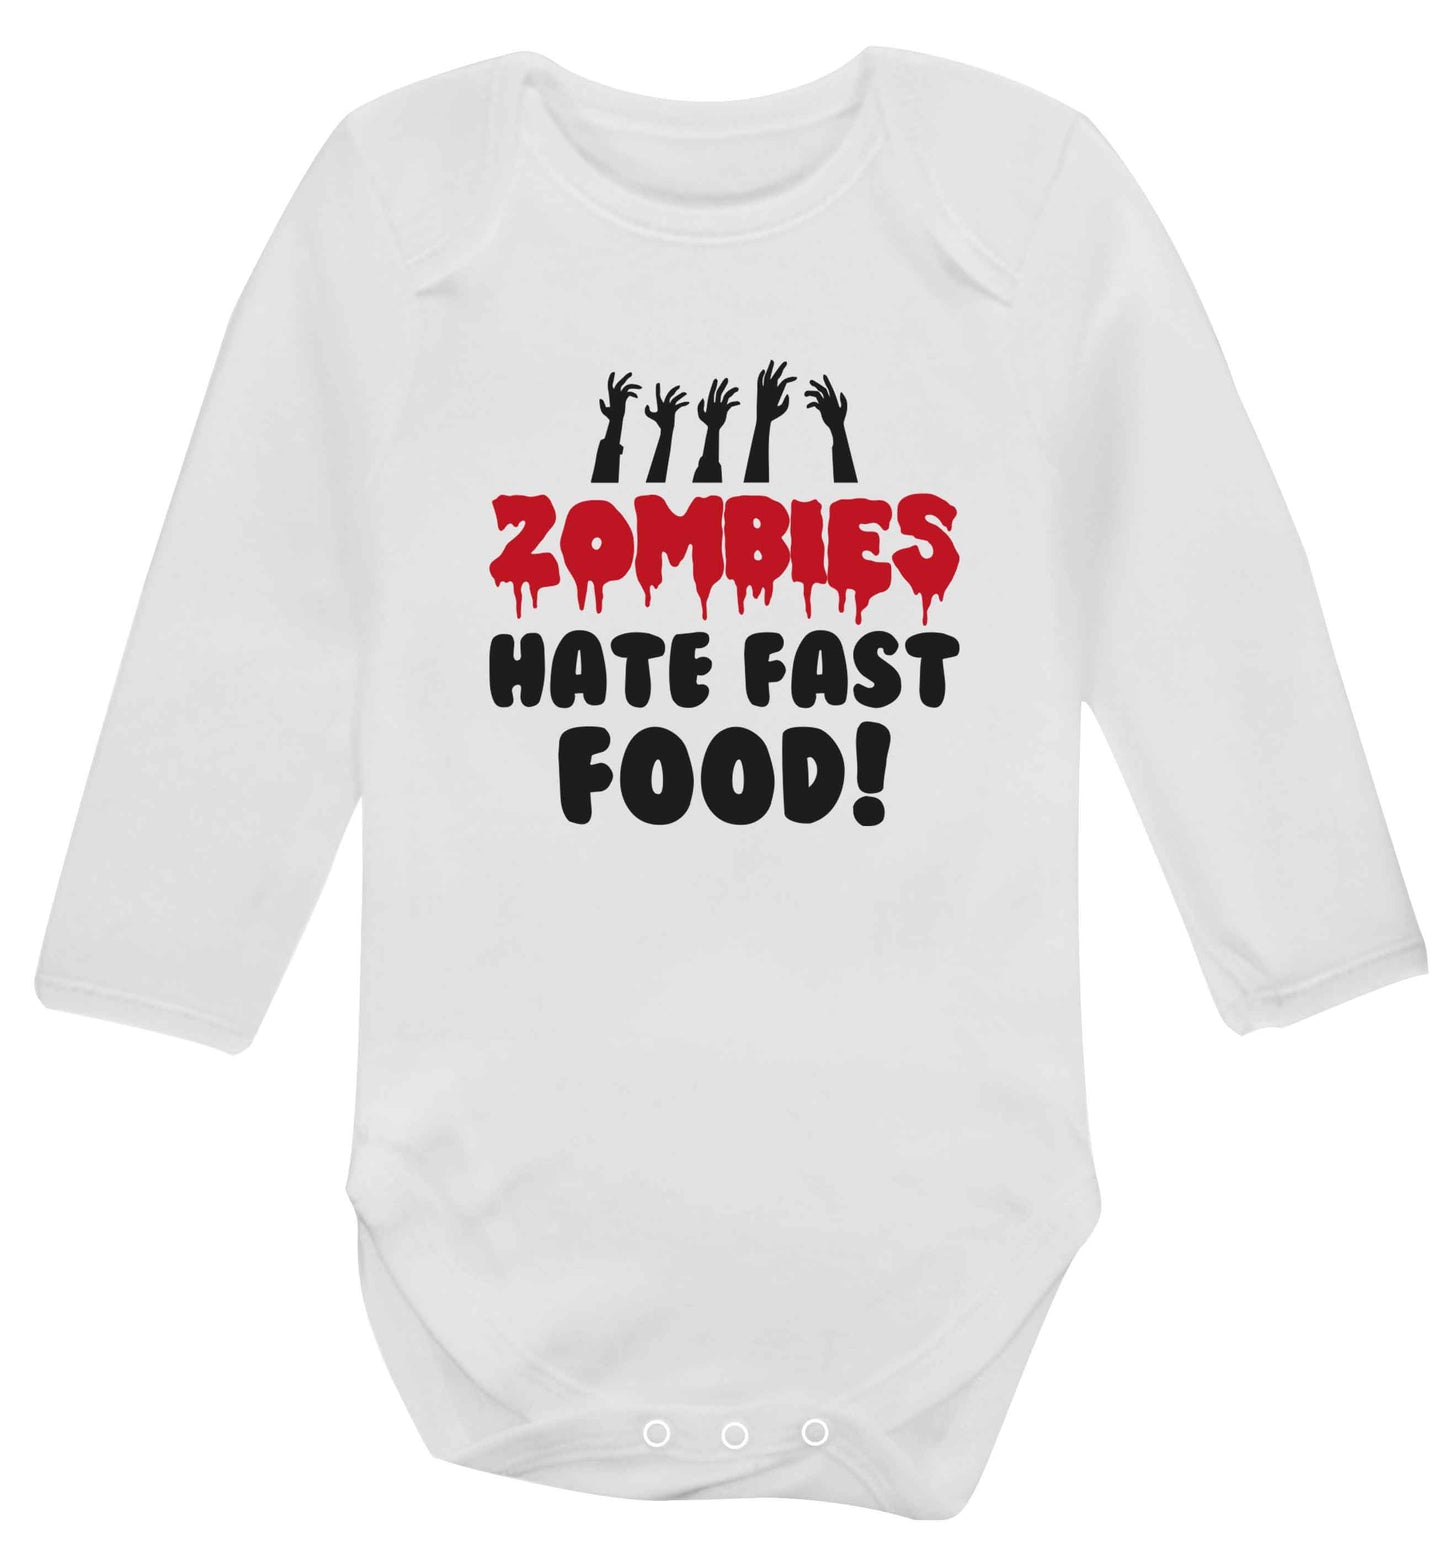 Zombies hate fast food baby vest long sleeved white 6-12 months